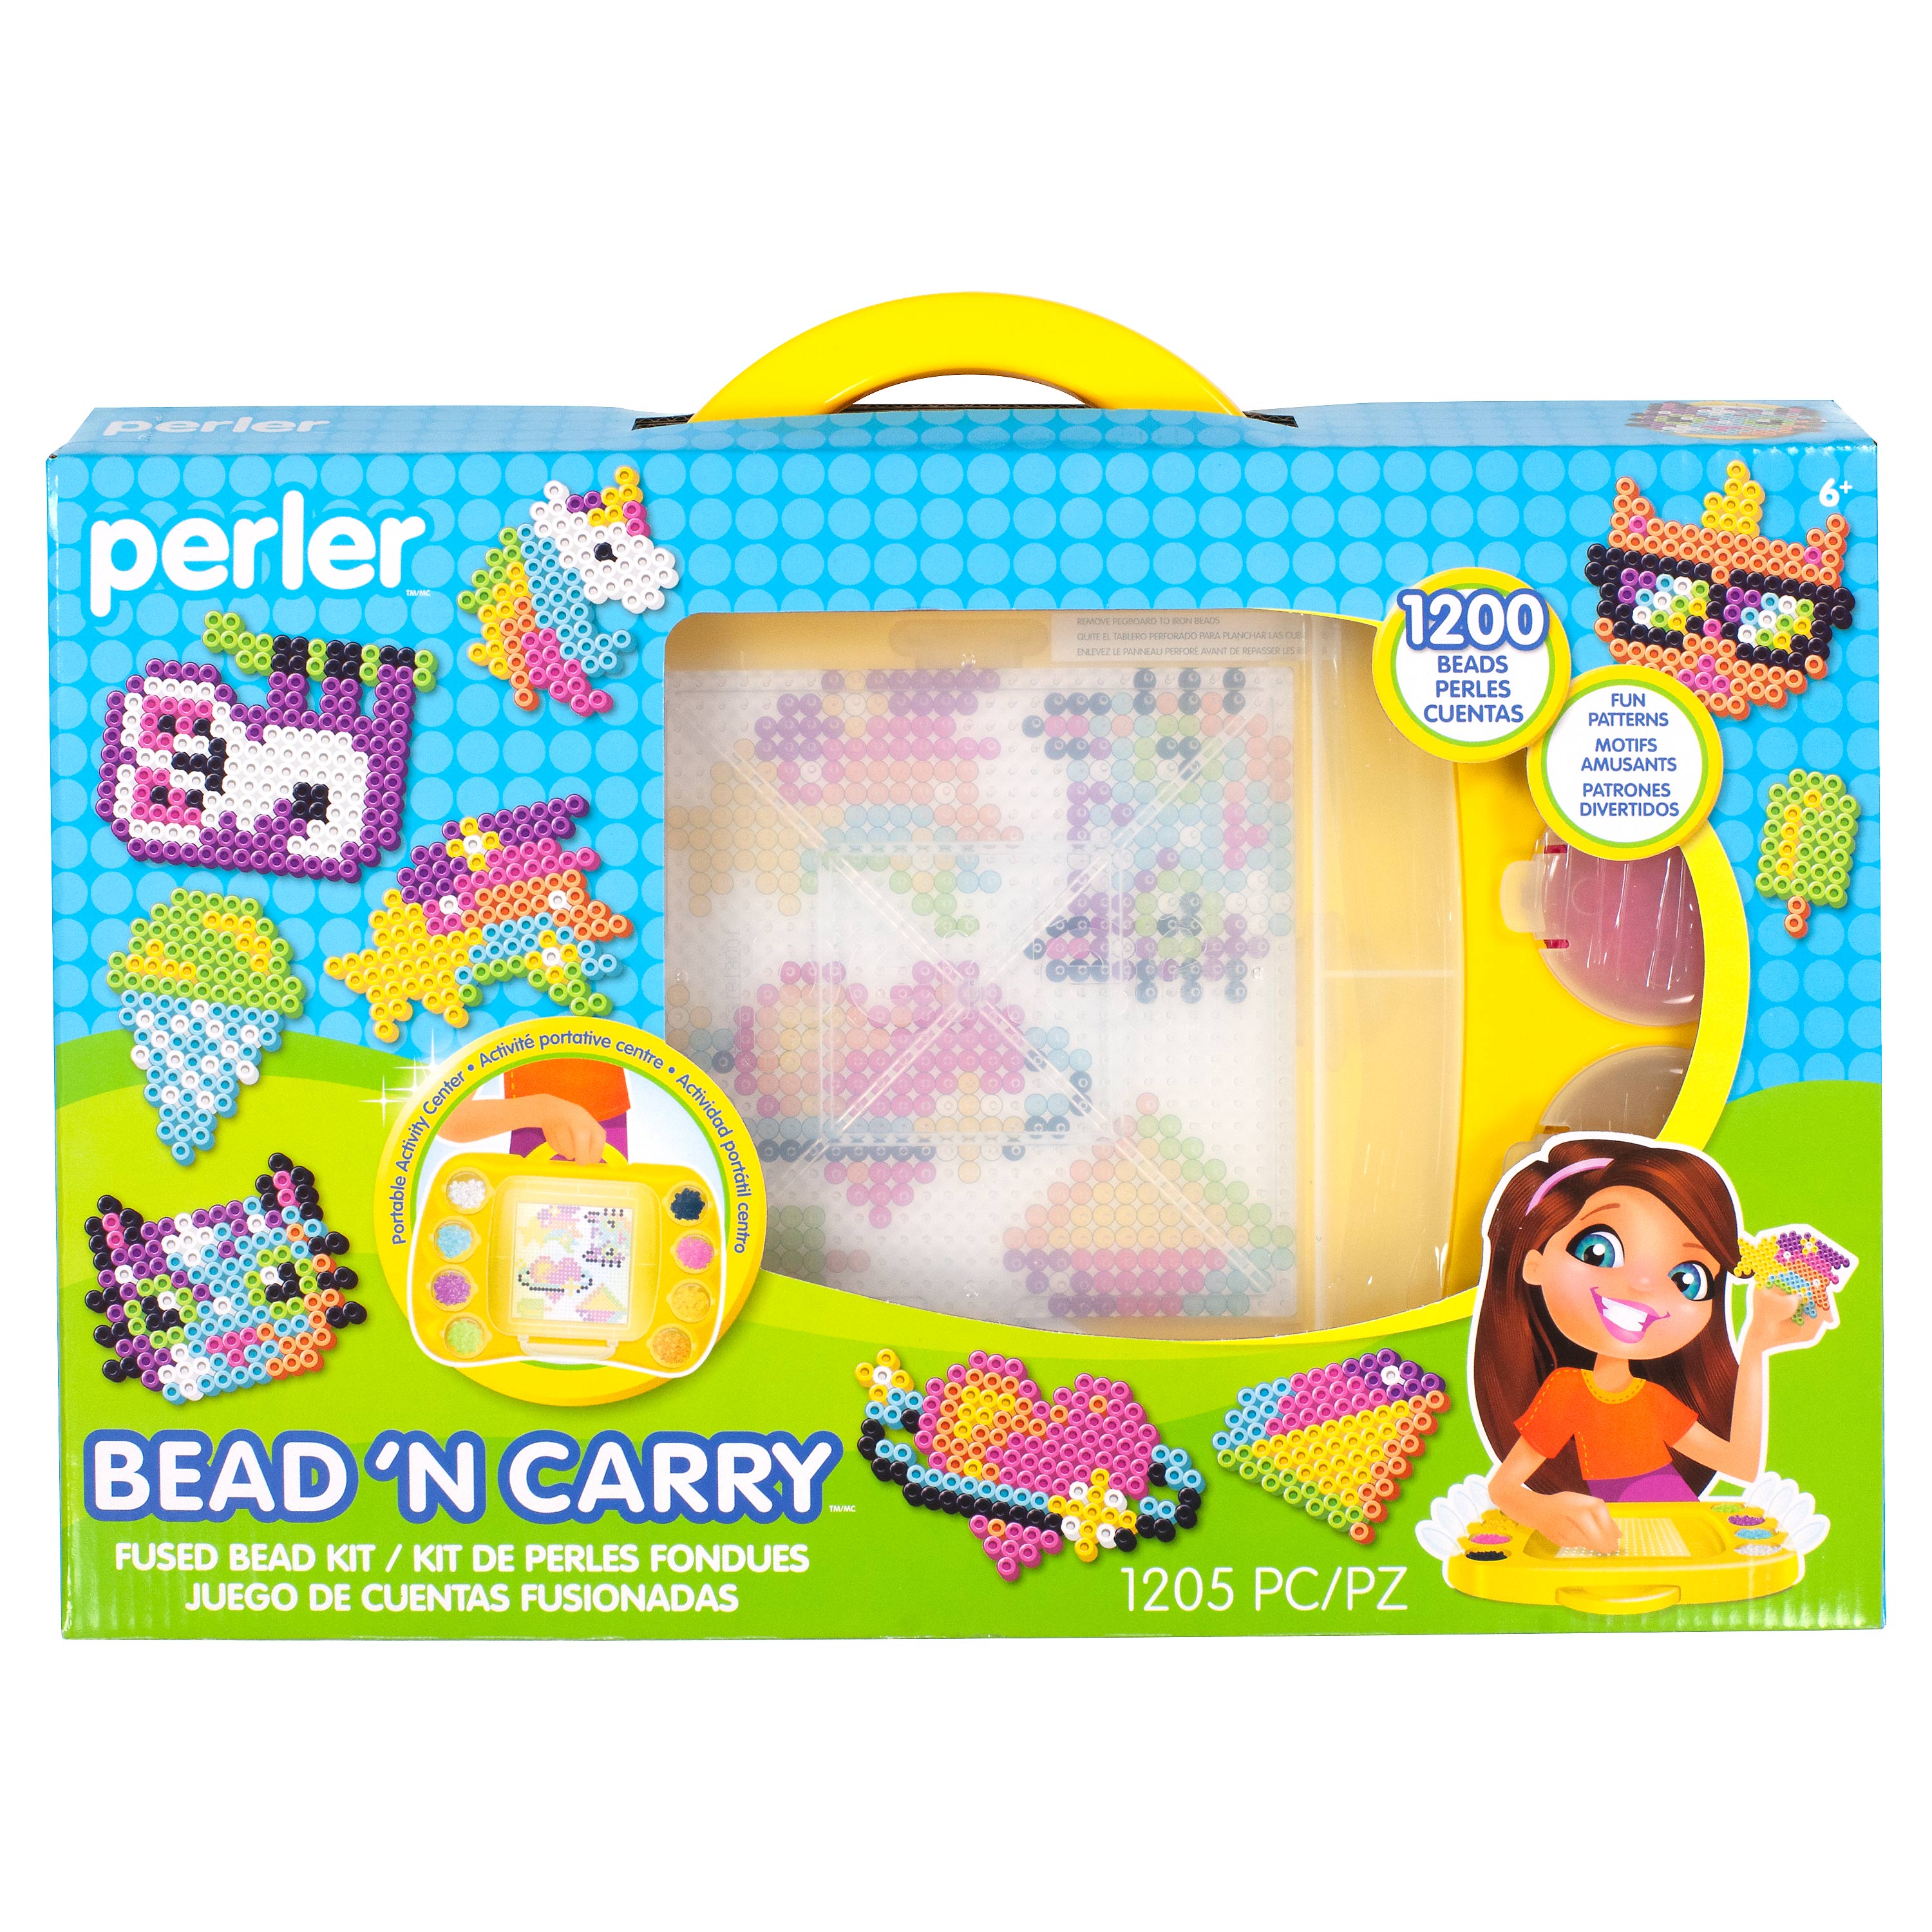 Perler Bead 'N Carry Fused Bead Activity Kit, Ages 6 and up, 1205 Pieces - image 3 of 5